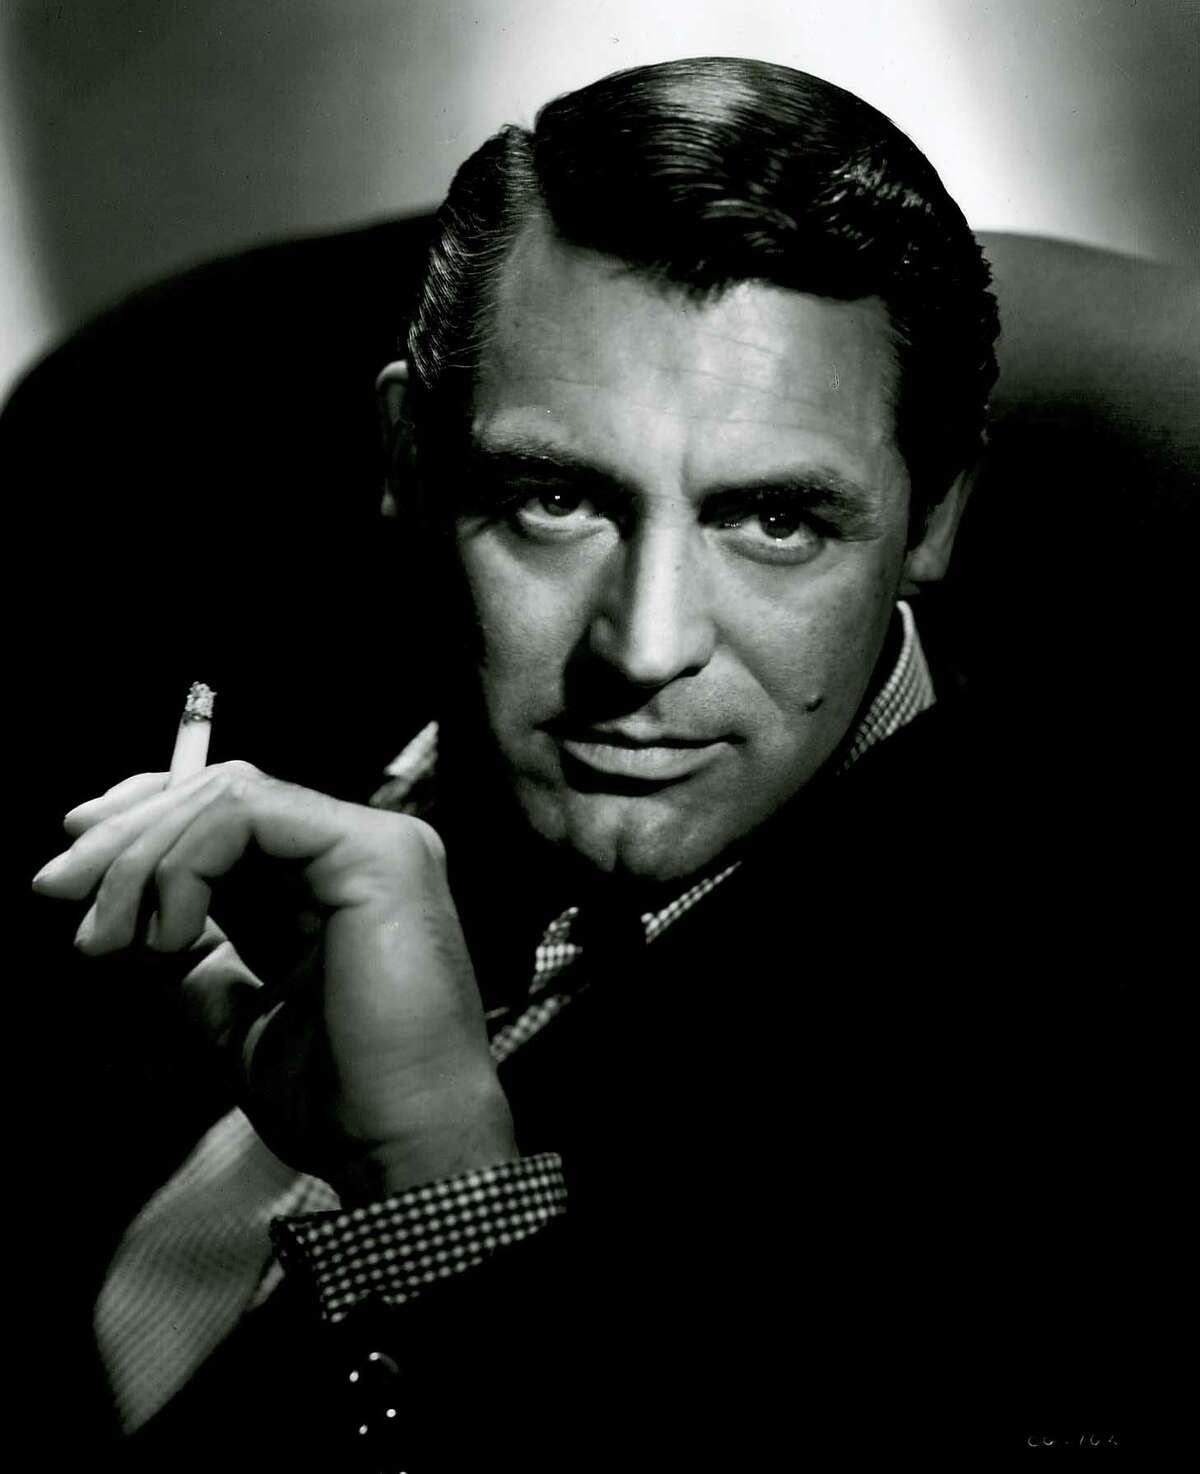 Cary Grant was left handed.